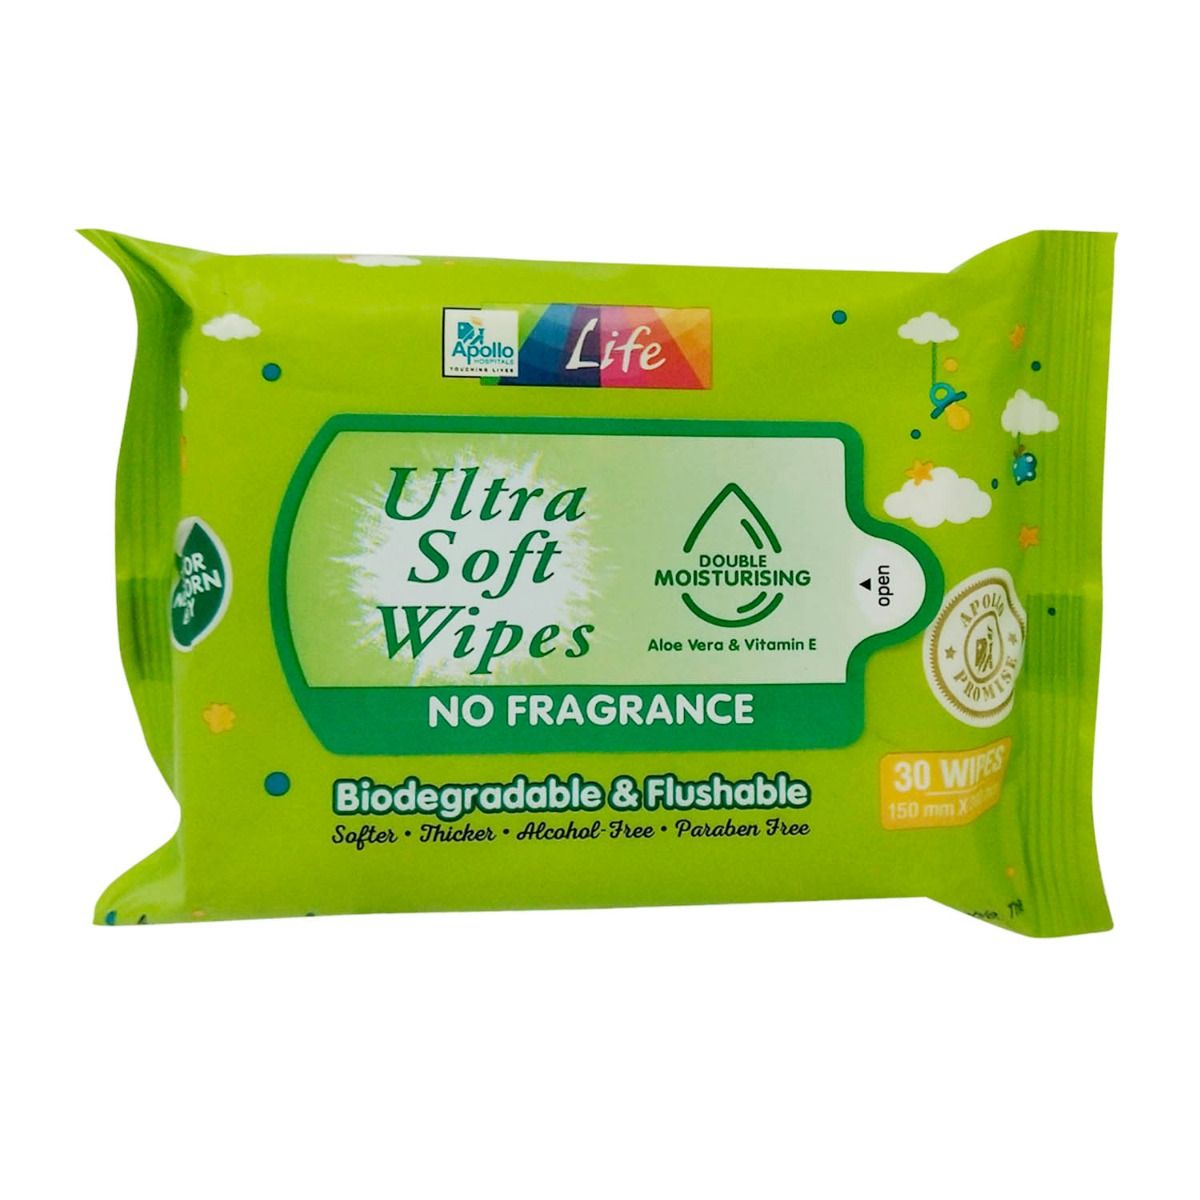 Buy Apollo Life Ultra Soft Biodegradable & Flushable Baby Wipes, 30 Count Online